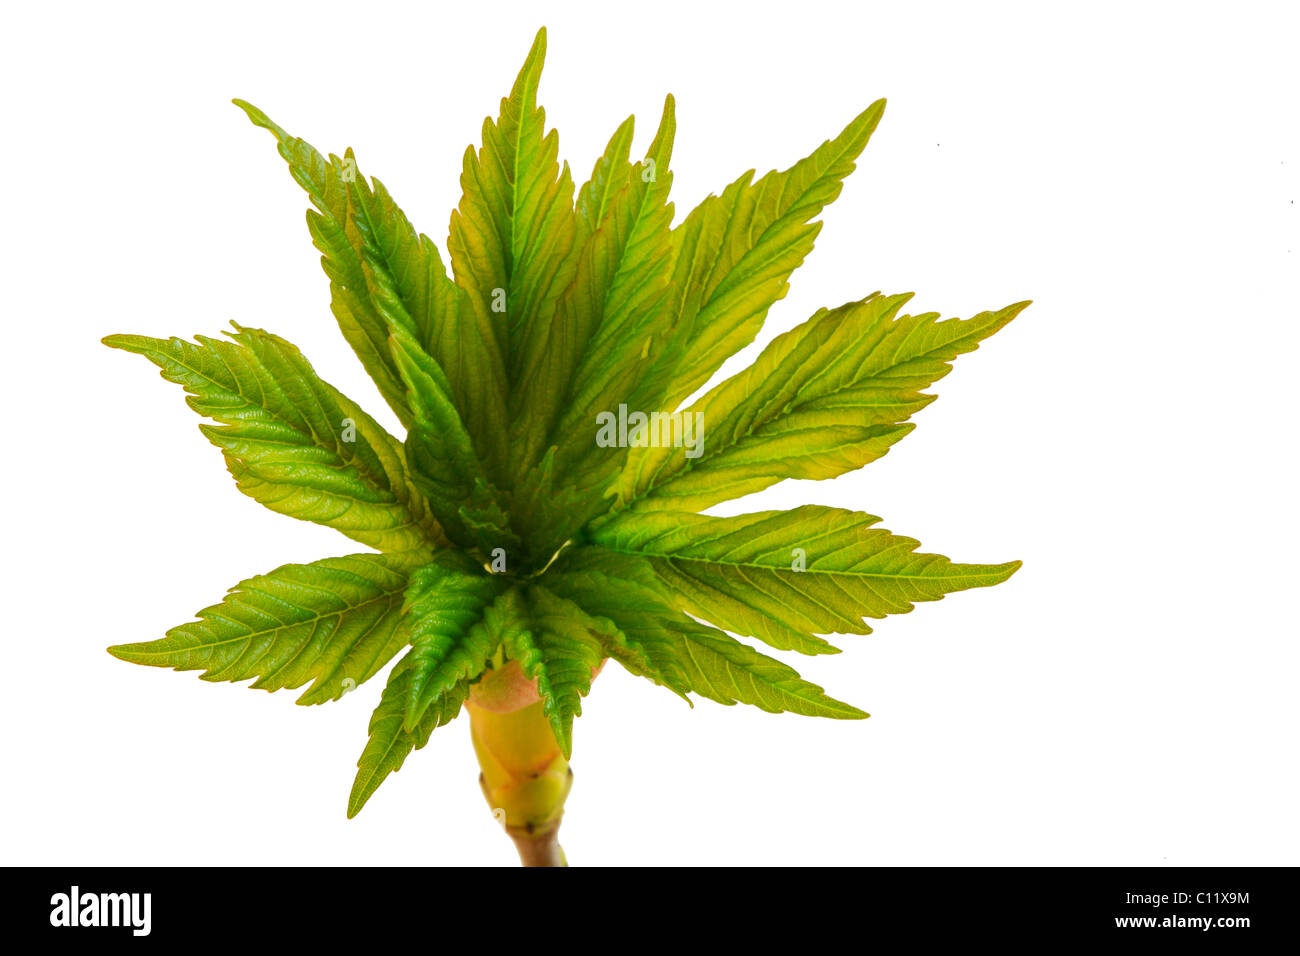 Fresh green of a maple tree (Acer), spring shoots Stock Photo